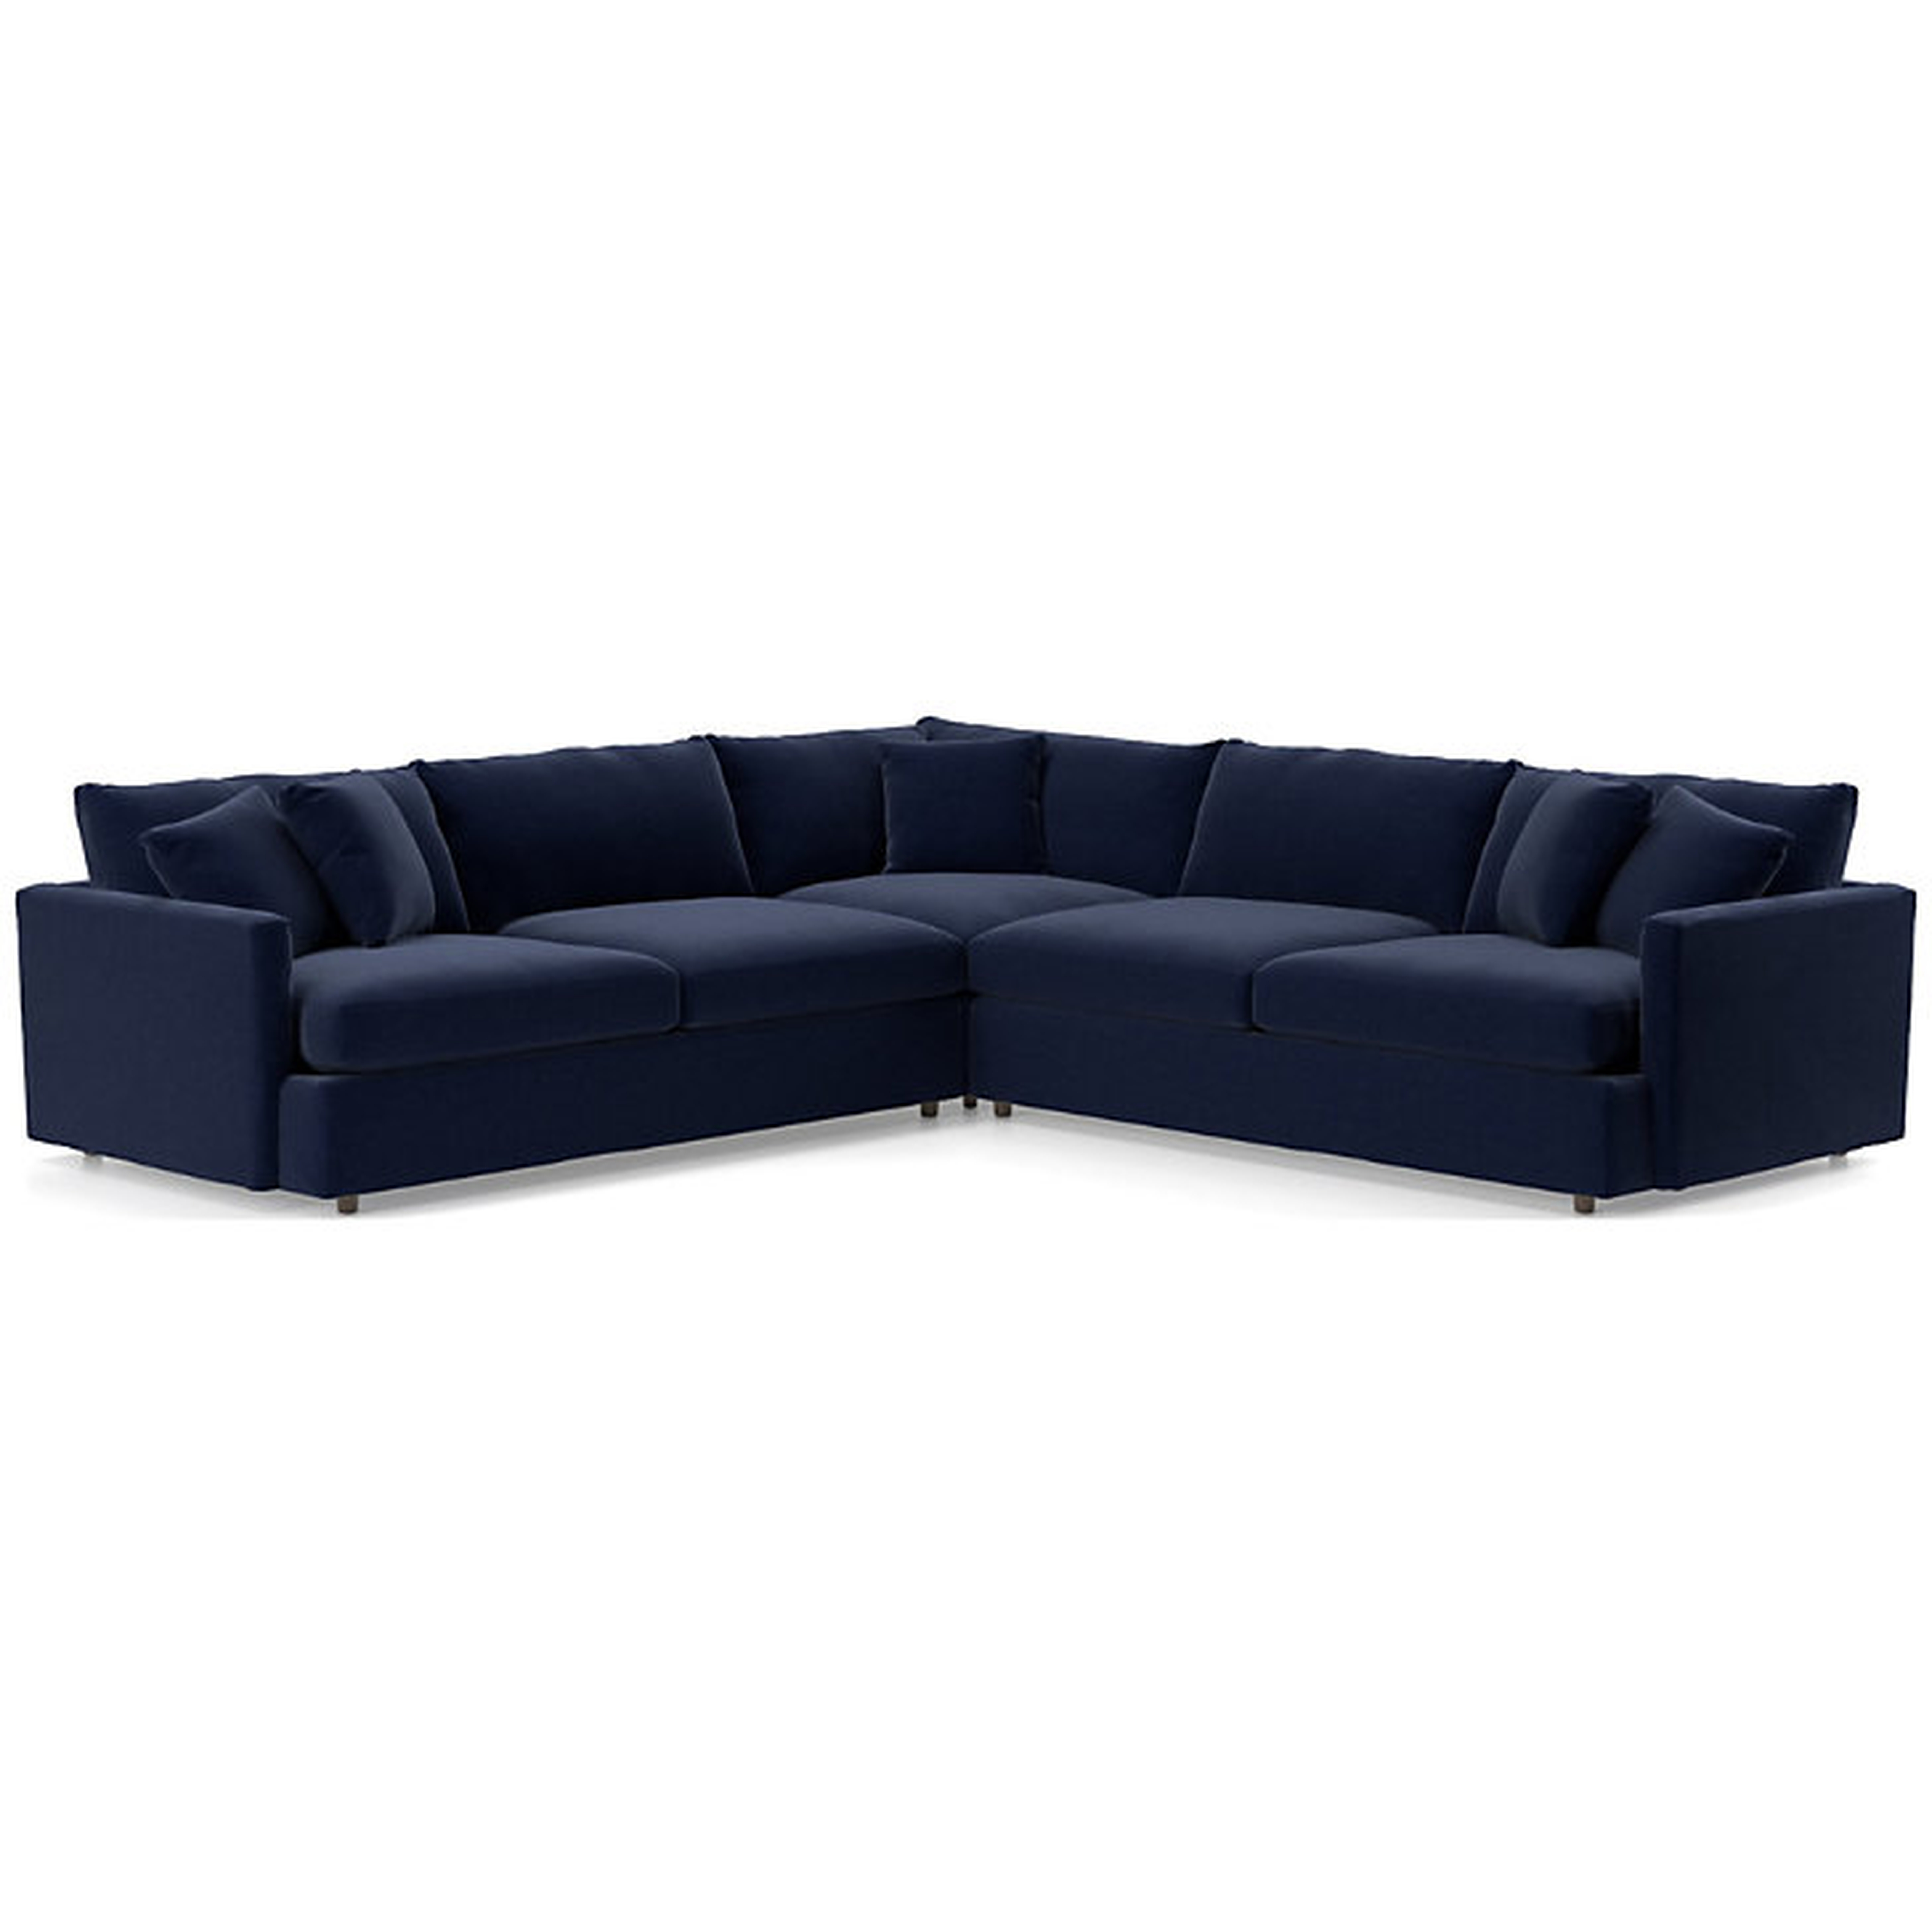 Lounge II 3-Piece Sectional Sofa - View, Navy - Crate and Barrel